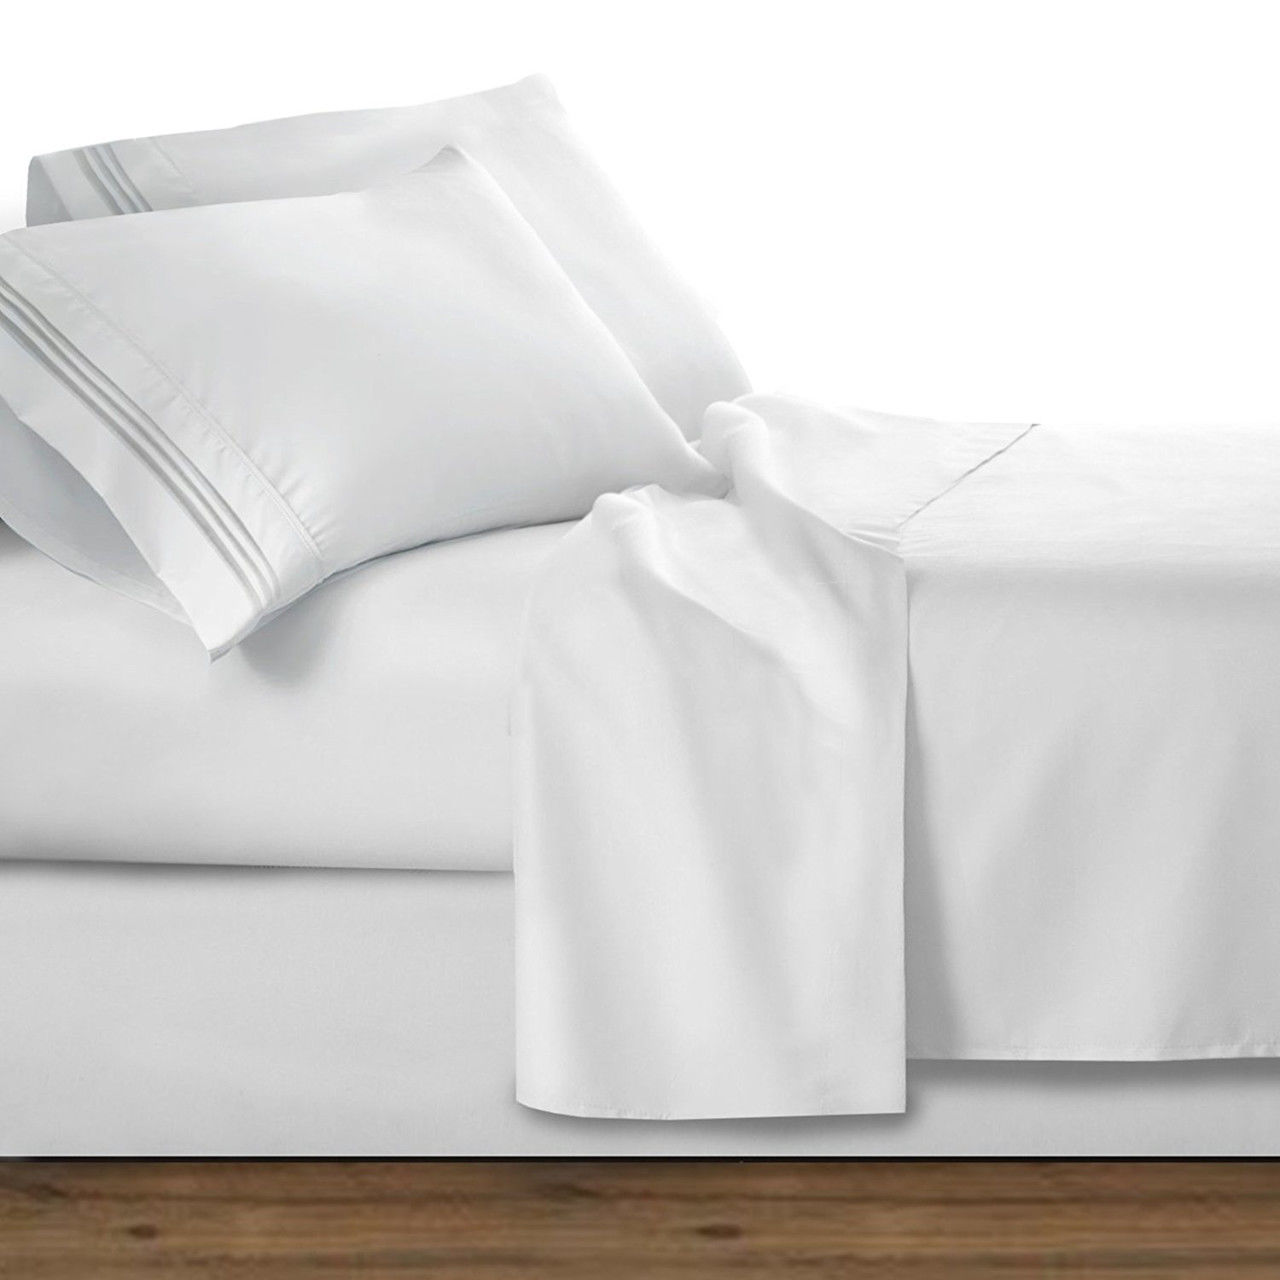 Can you buy extra pleated pillowcases?